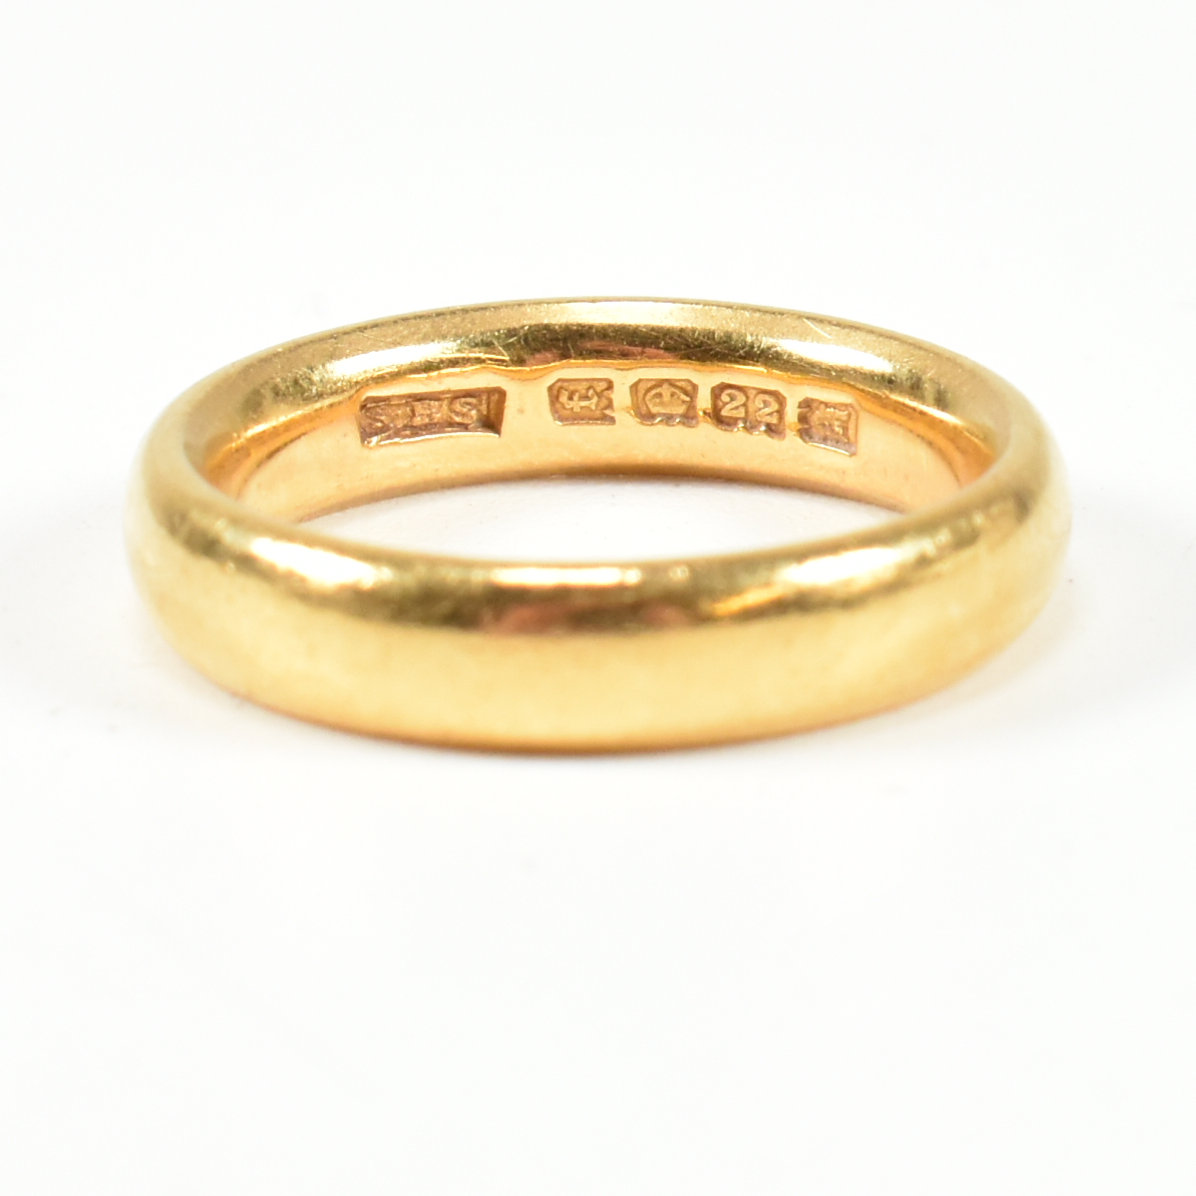 HALLMARKED 22CT GOLD BAND RING - Image 4 of 6